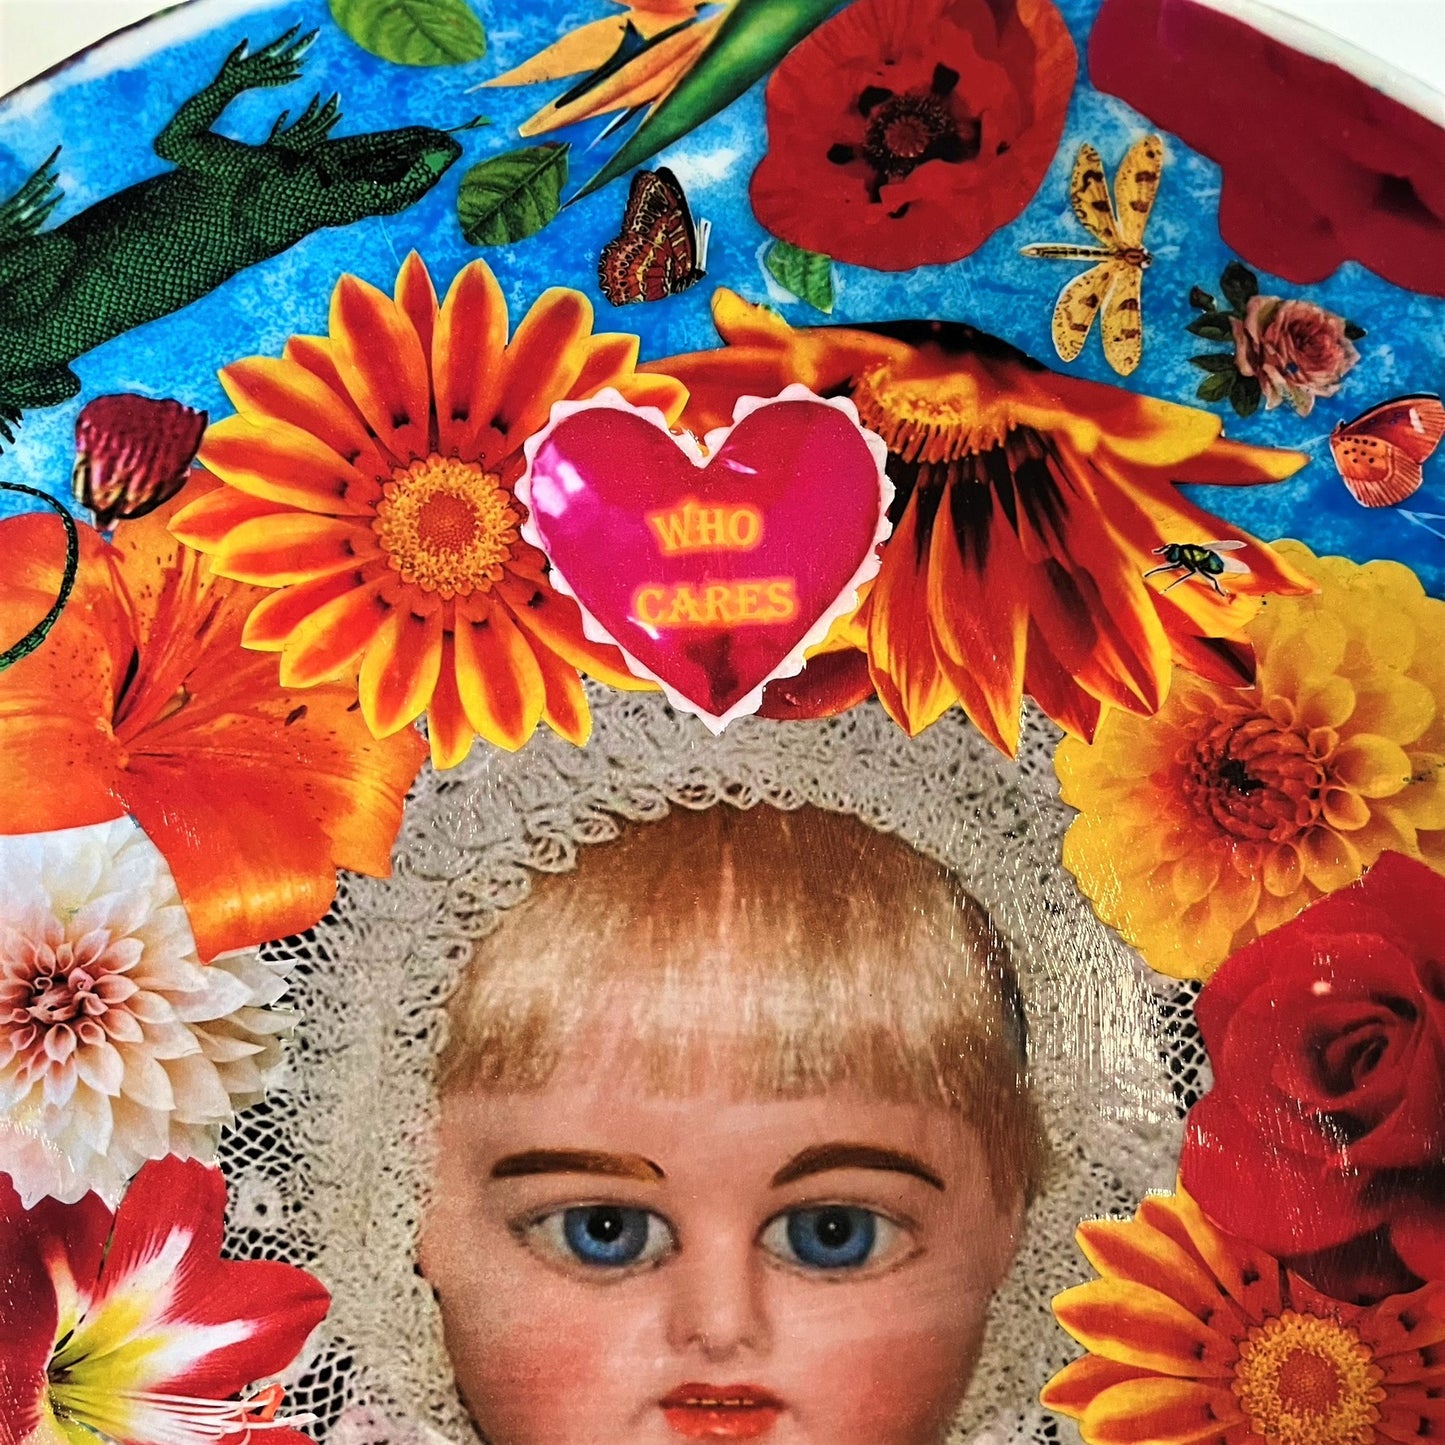 "Who Cares" Wall Plate by House of Frisson, featuring a vintage doll surrounded by flowers, moths, and a lizard, on a blue background. Showing a closeup detail of the colourful flowers and a heart with "Who Cares" written on it.